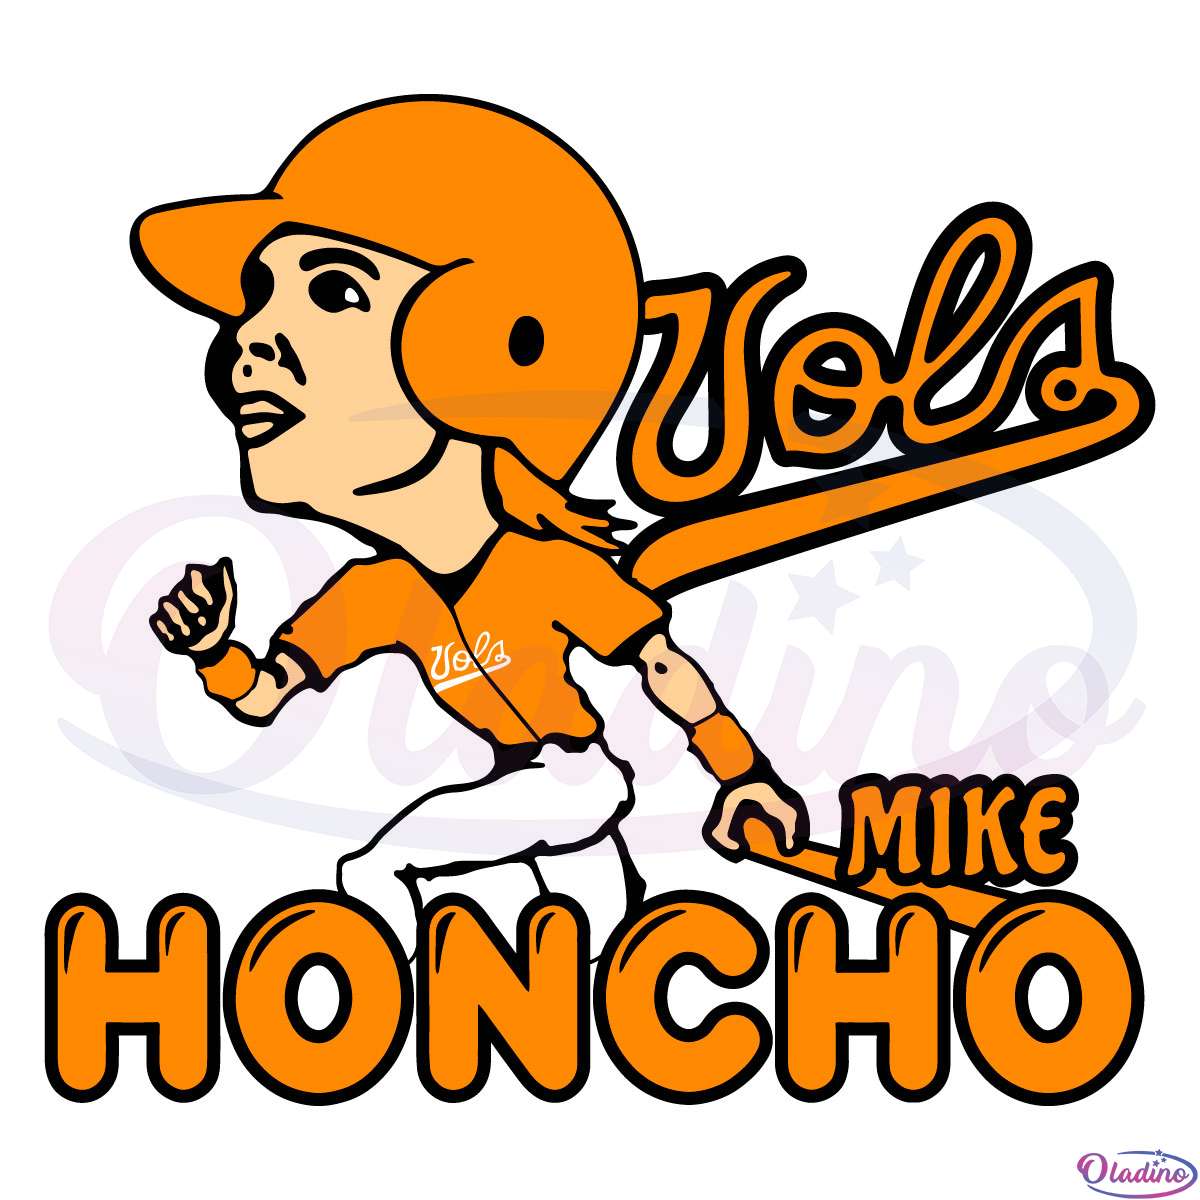 Tennessee Mike Honcho Svg, Tennessee Beck Mike Honcho Svg